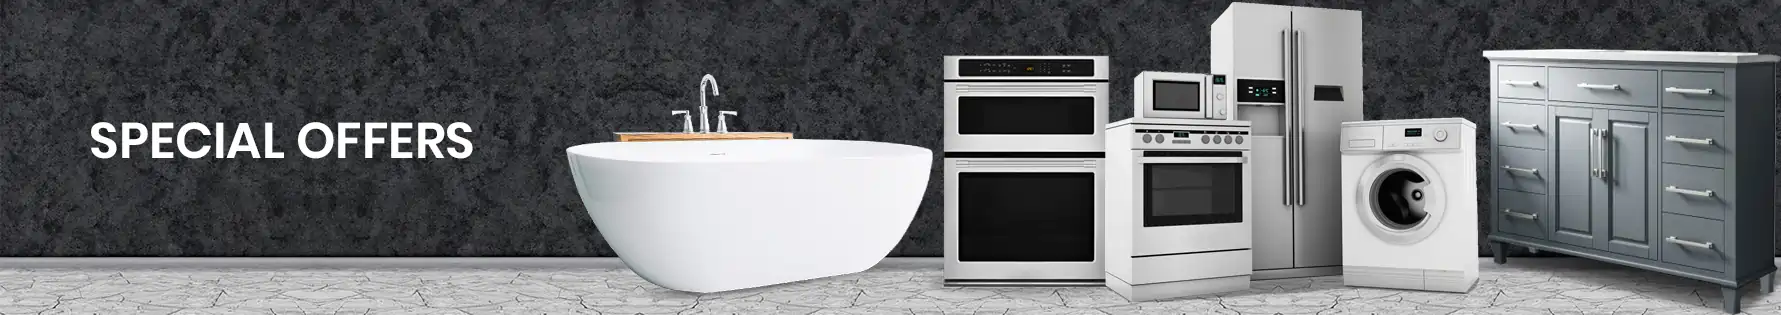 Exclusive Home Appliance Offers: Upgrade Your Living Space for Less!